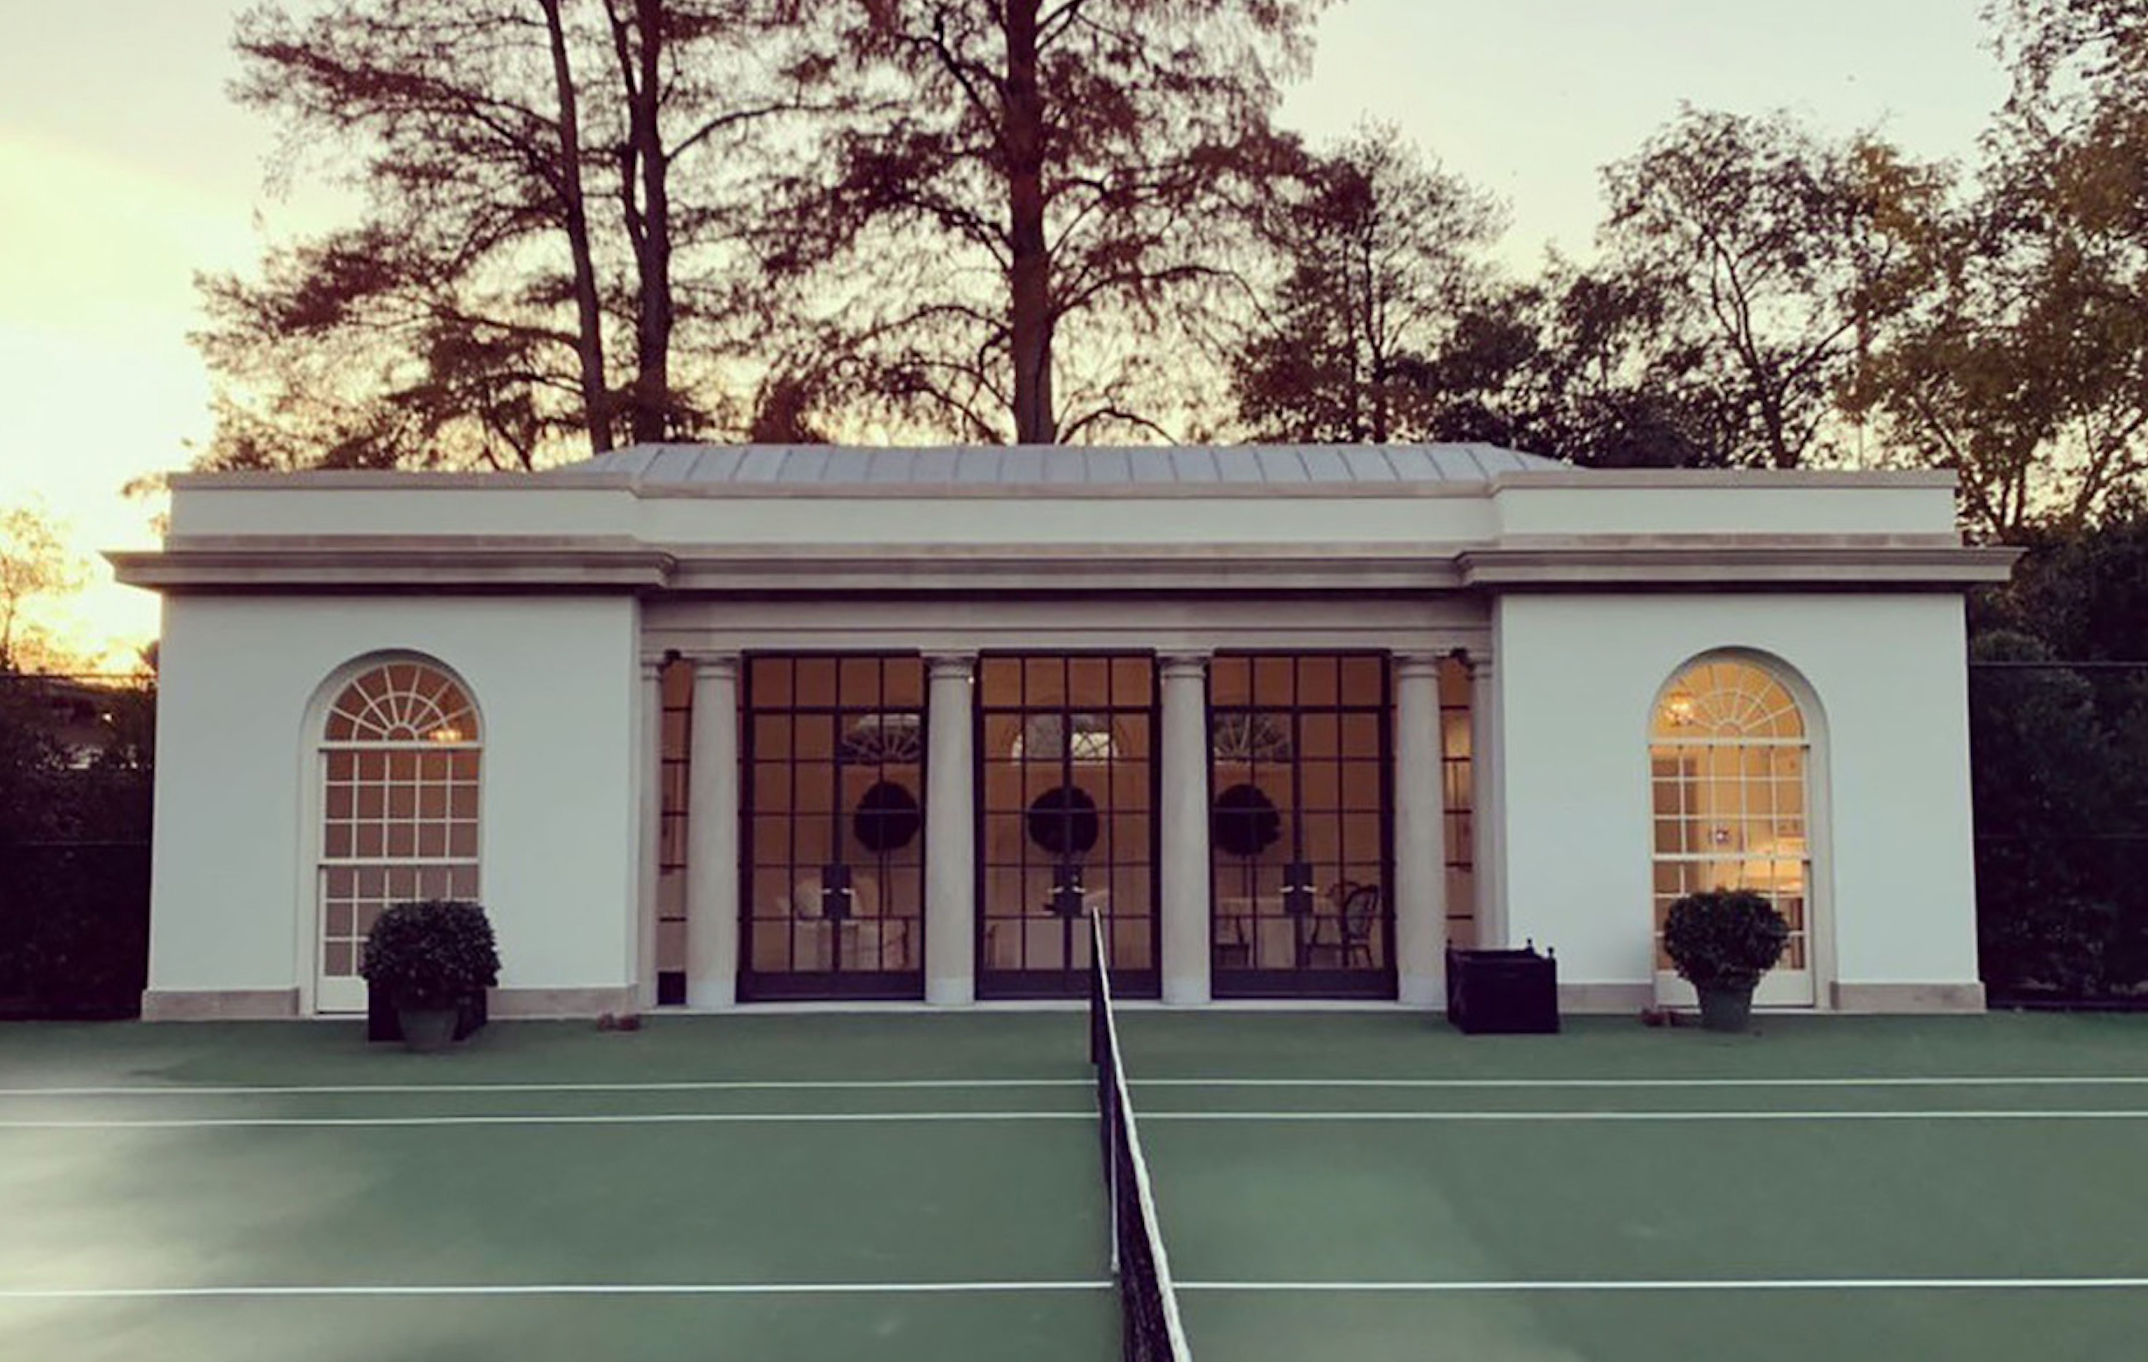 The White House S Classically Inspired Tennis Pavilion Is Complete Draws Criticism For Timing